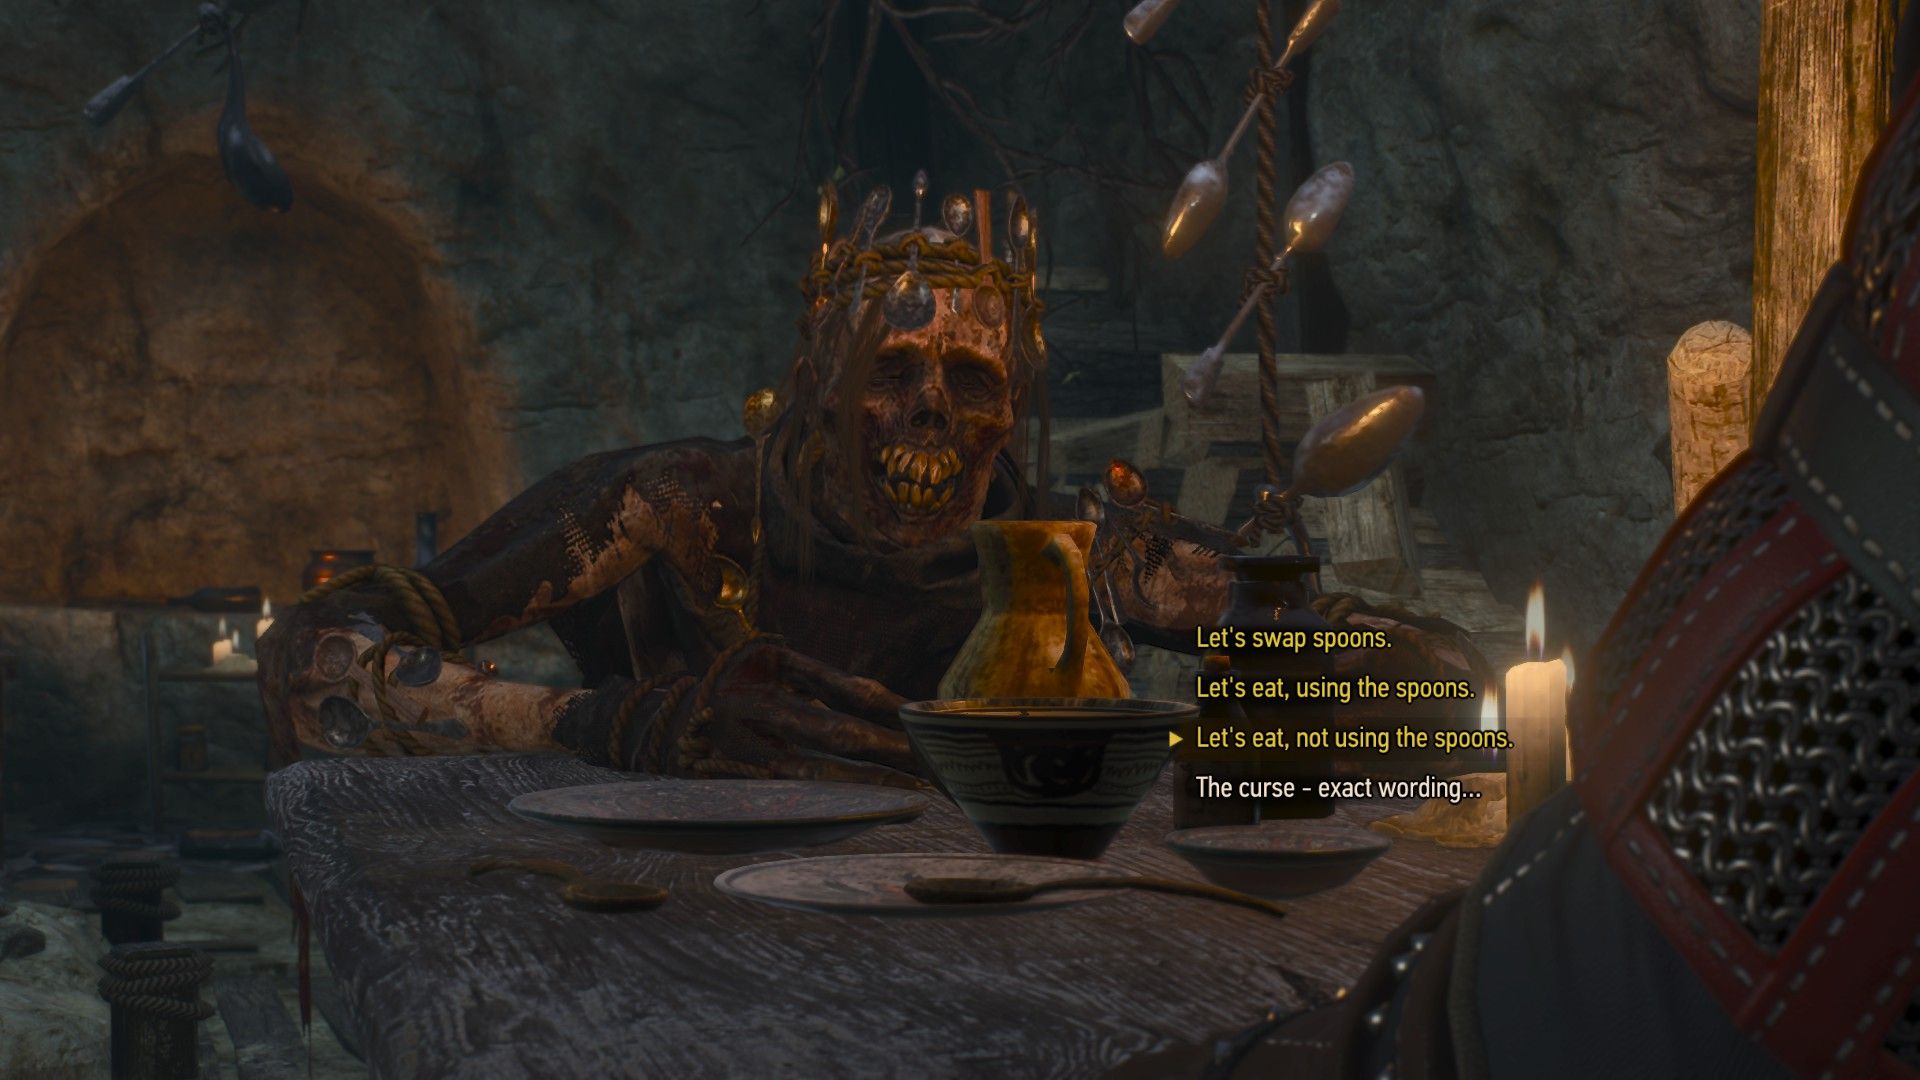 Screenshot from The Witcher 3 with dialogue choices to help you see the Wight.